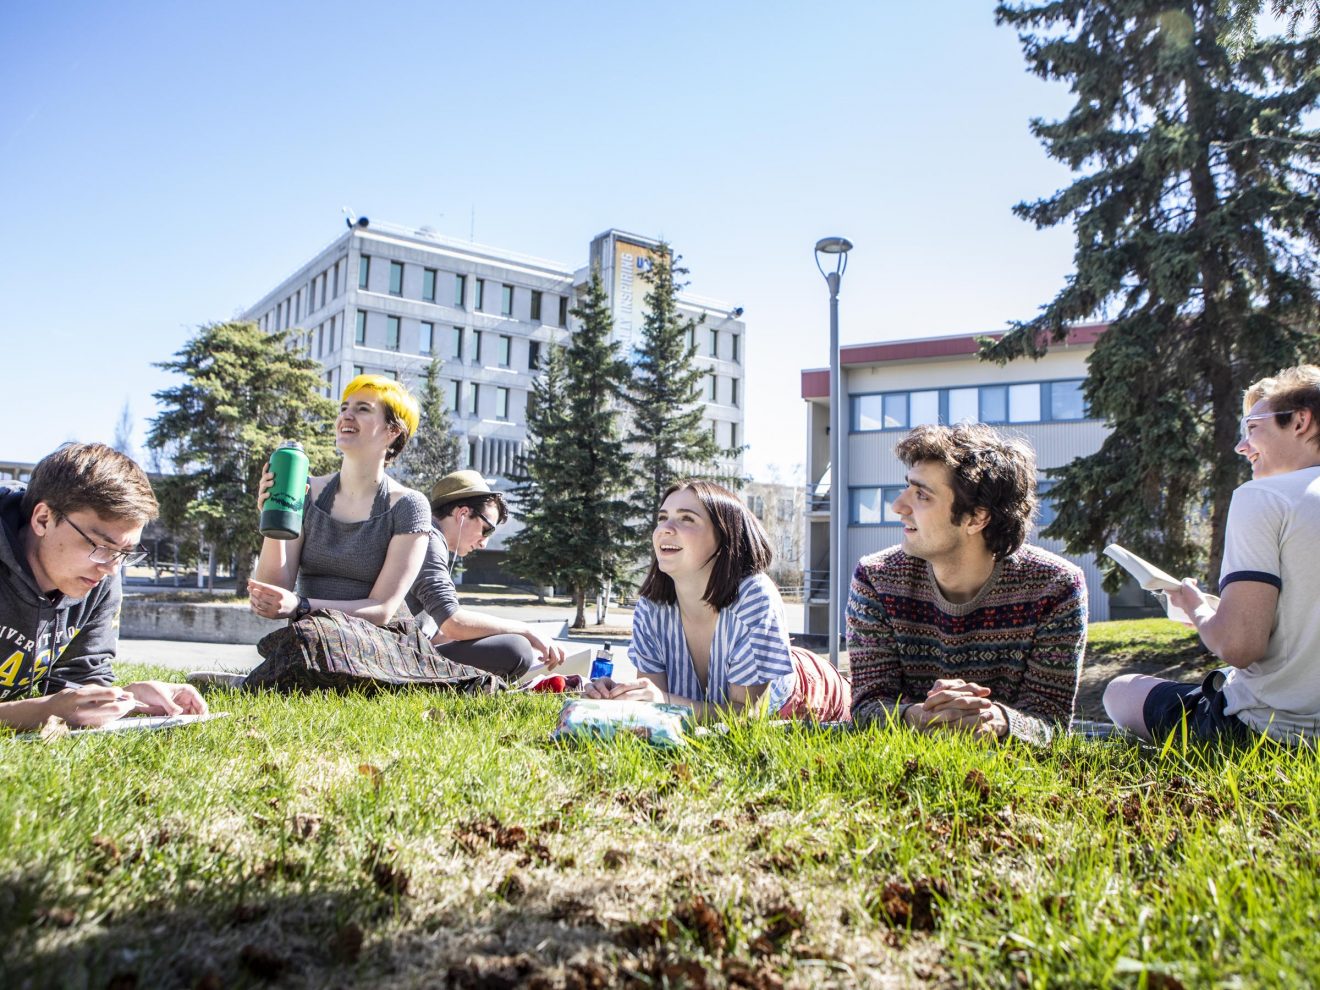 Students enjoy good weather on the green lawn outside Wood Center during finals week on the Fairbanks campus.